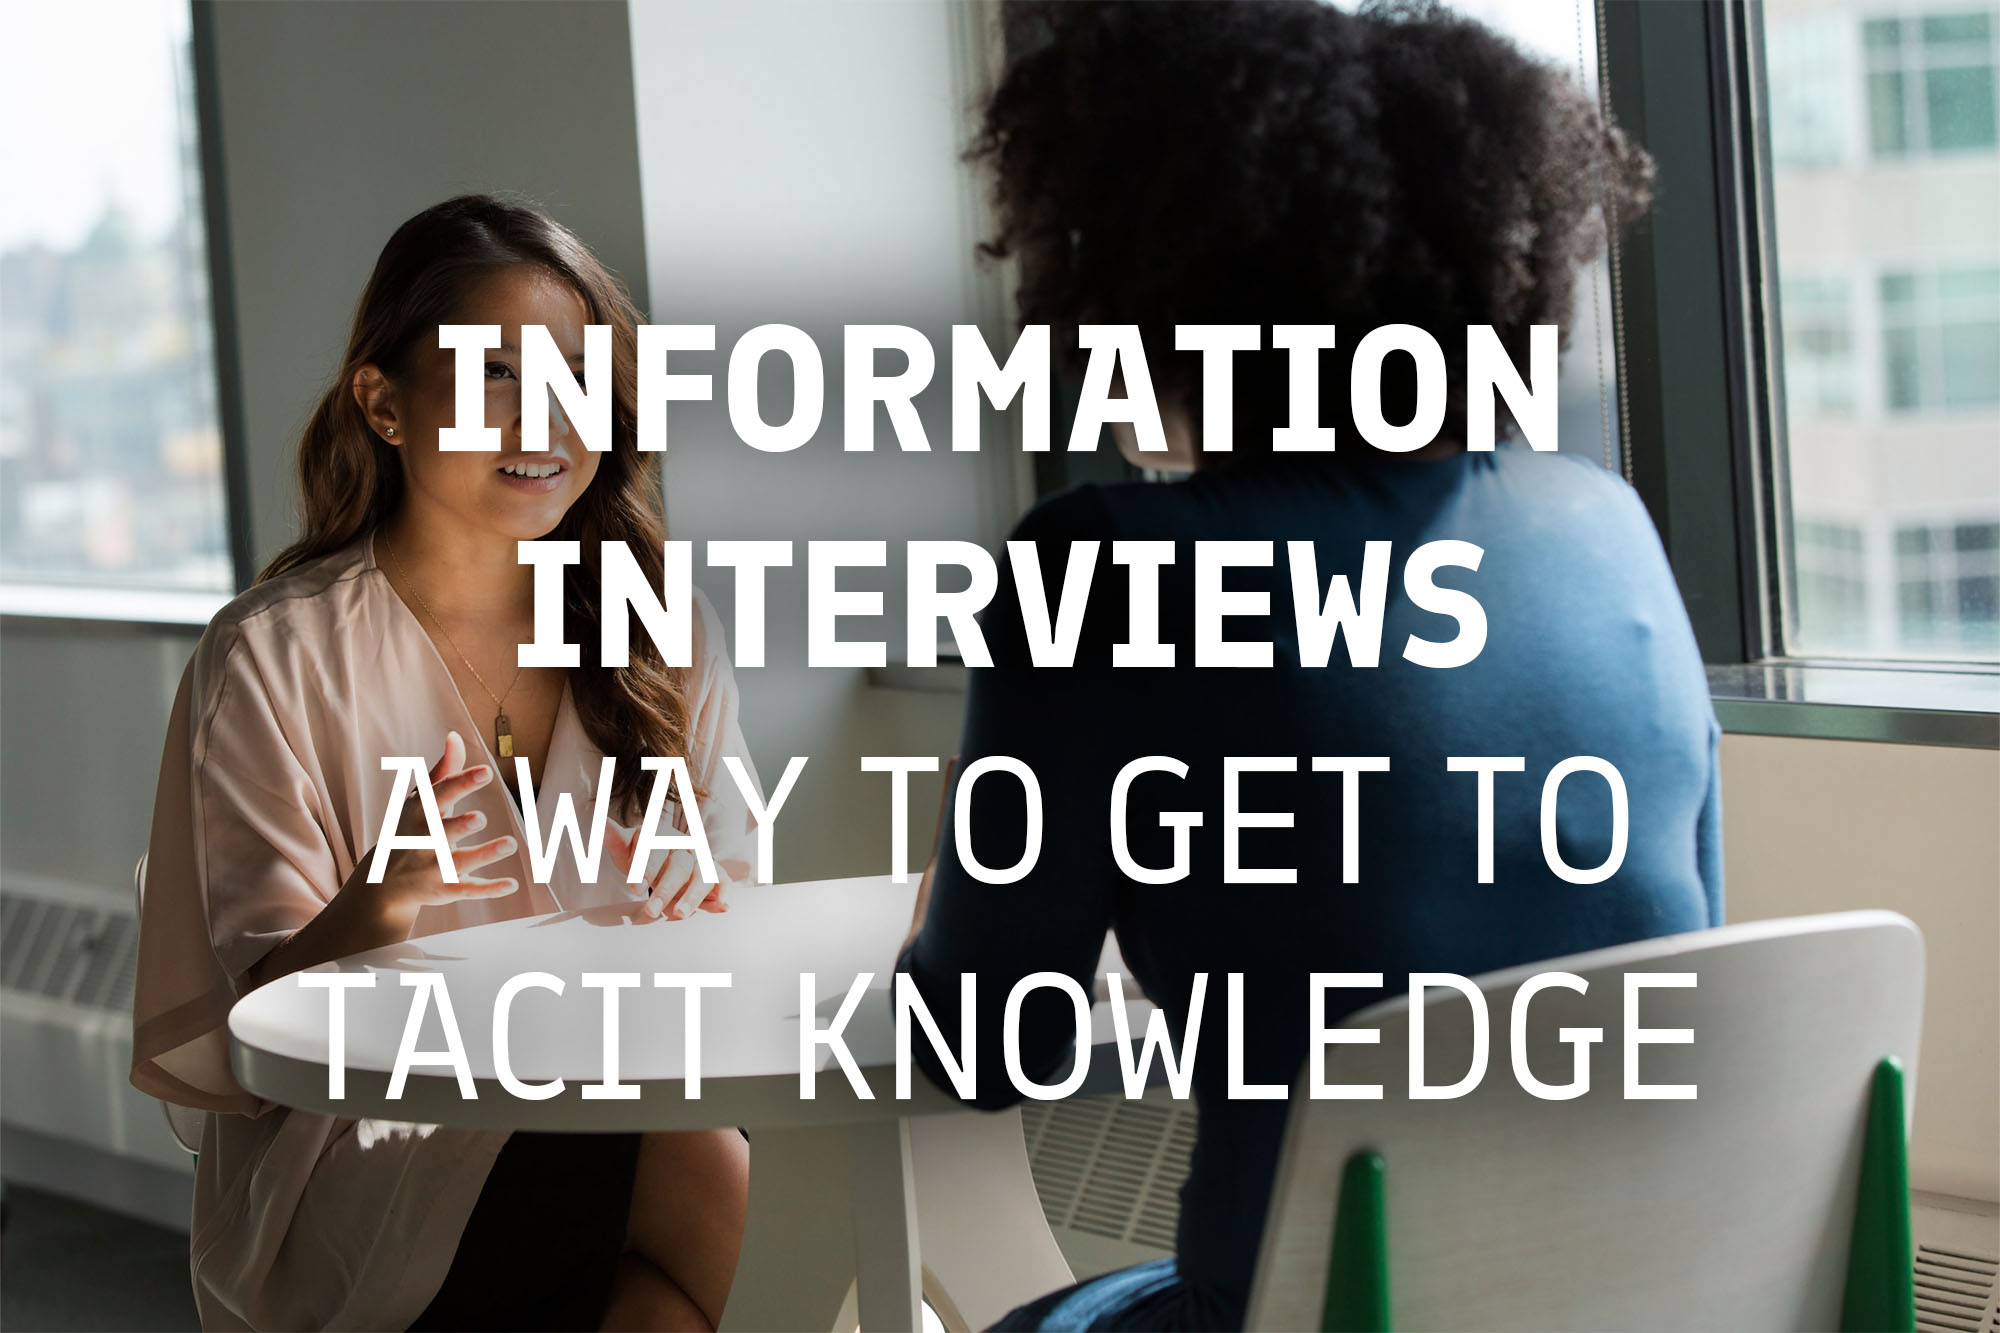 Article on information interviews